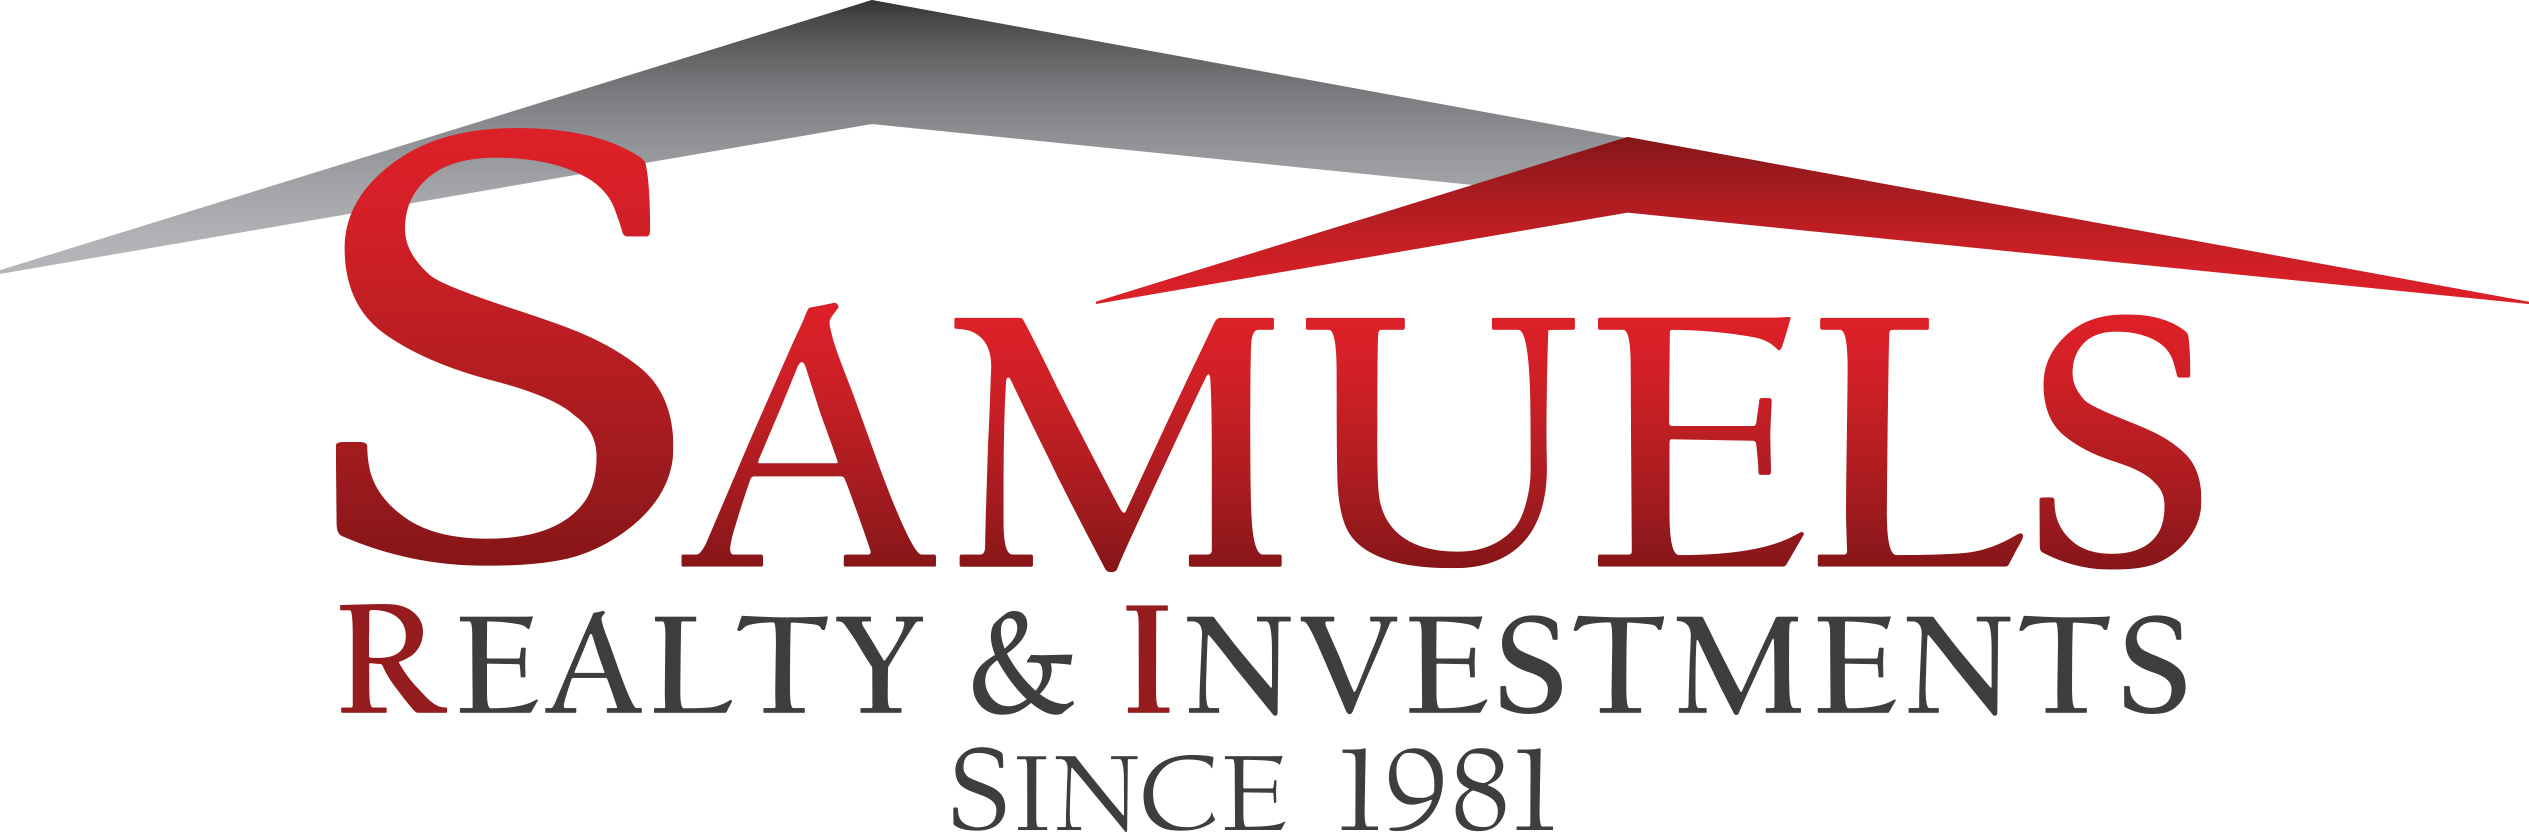 Samuels Realty and Investments